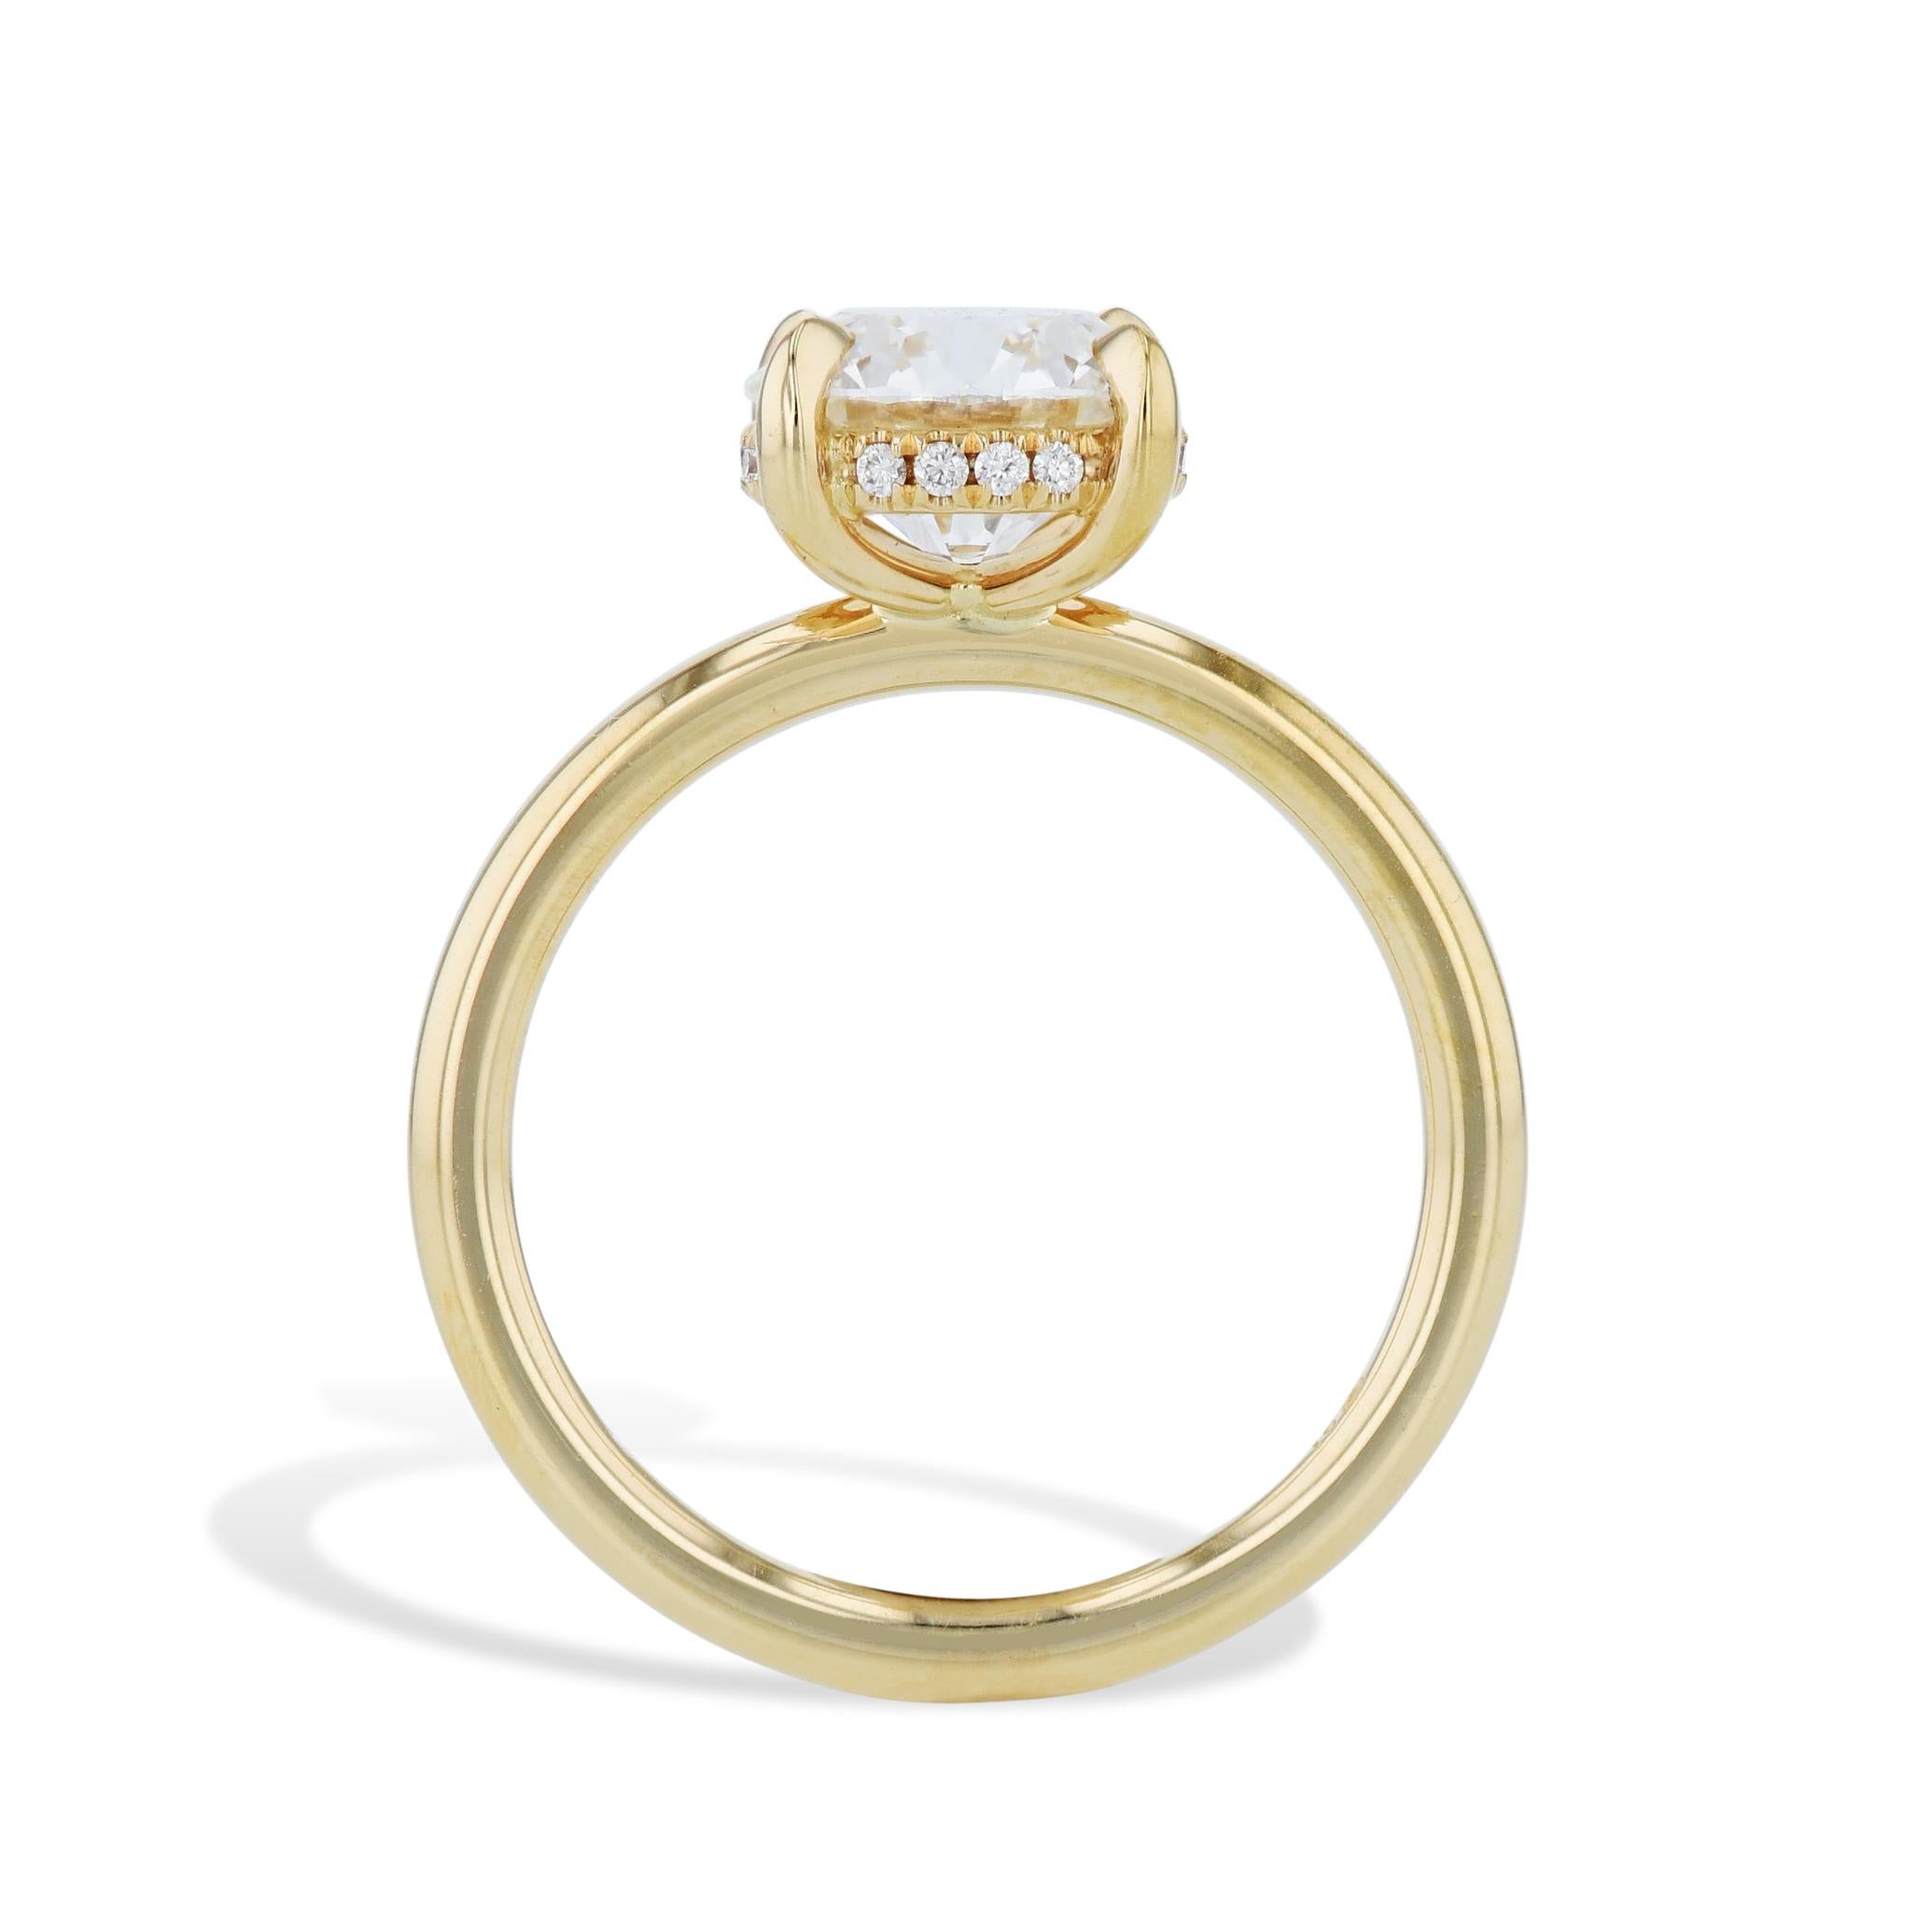 Handmade GIA Certified 2.09 Carat Round Diamond Yellow Gold Engagement Ring In New Condition For Sale In Miami, FL